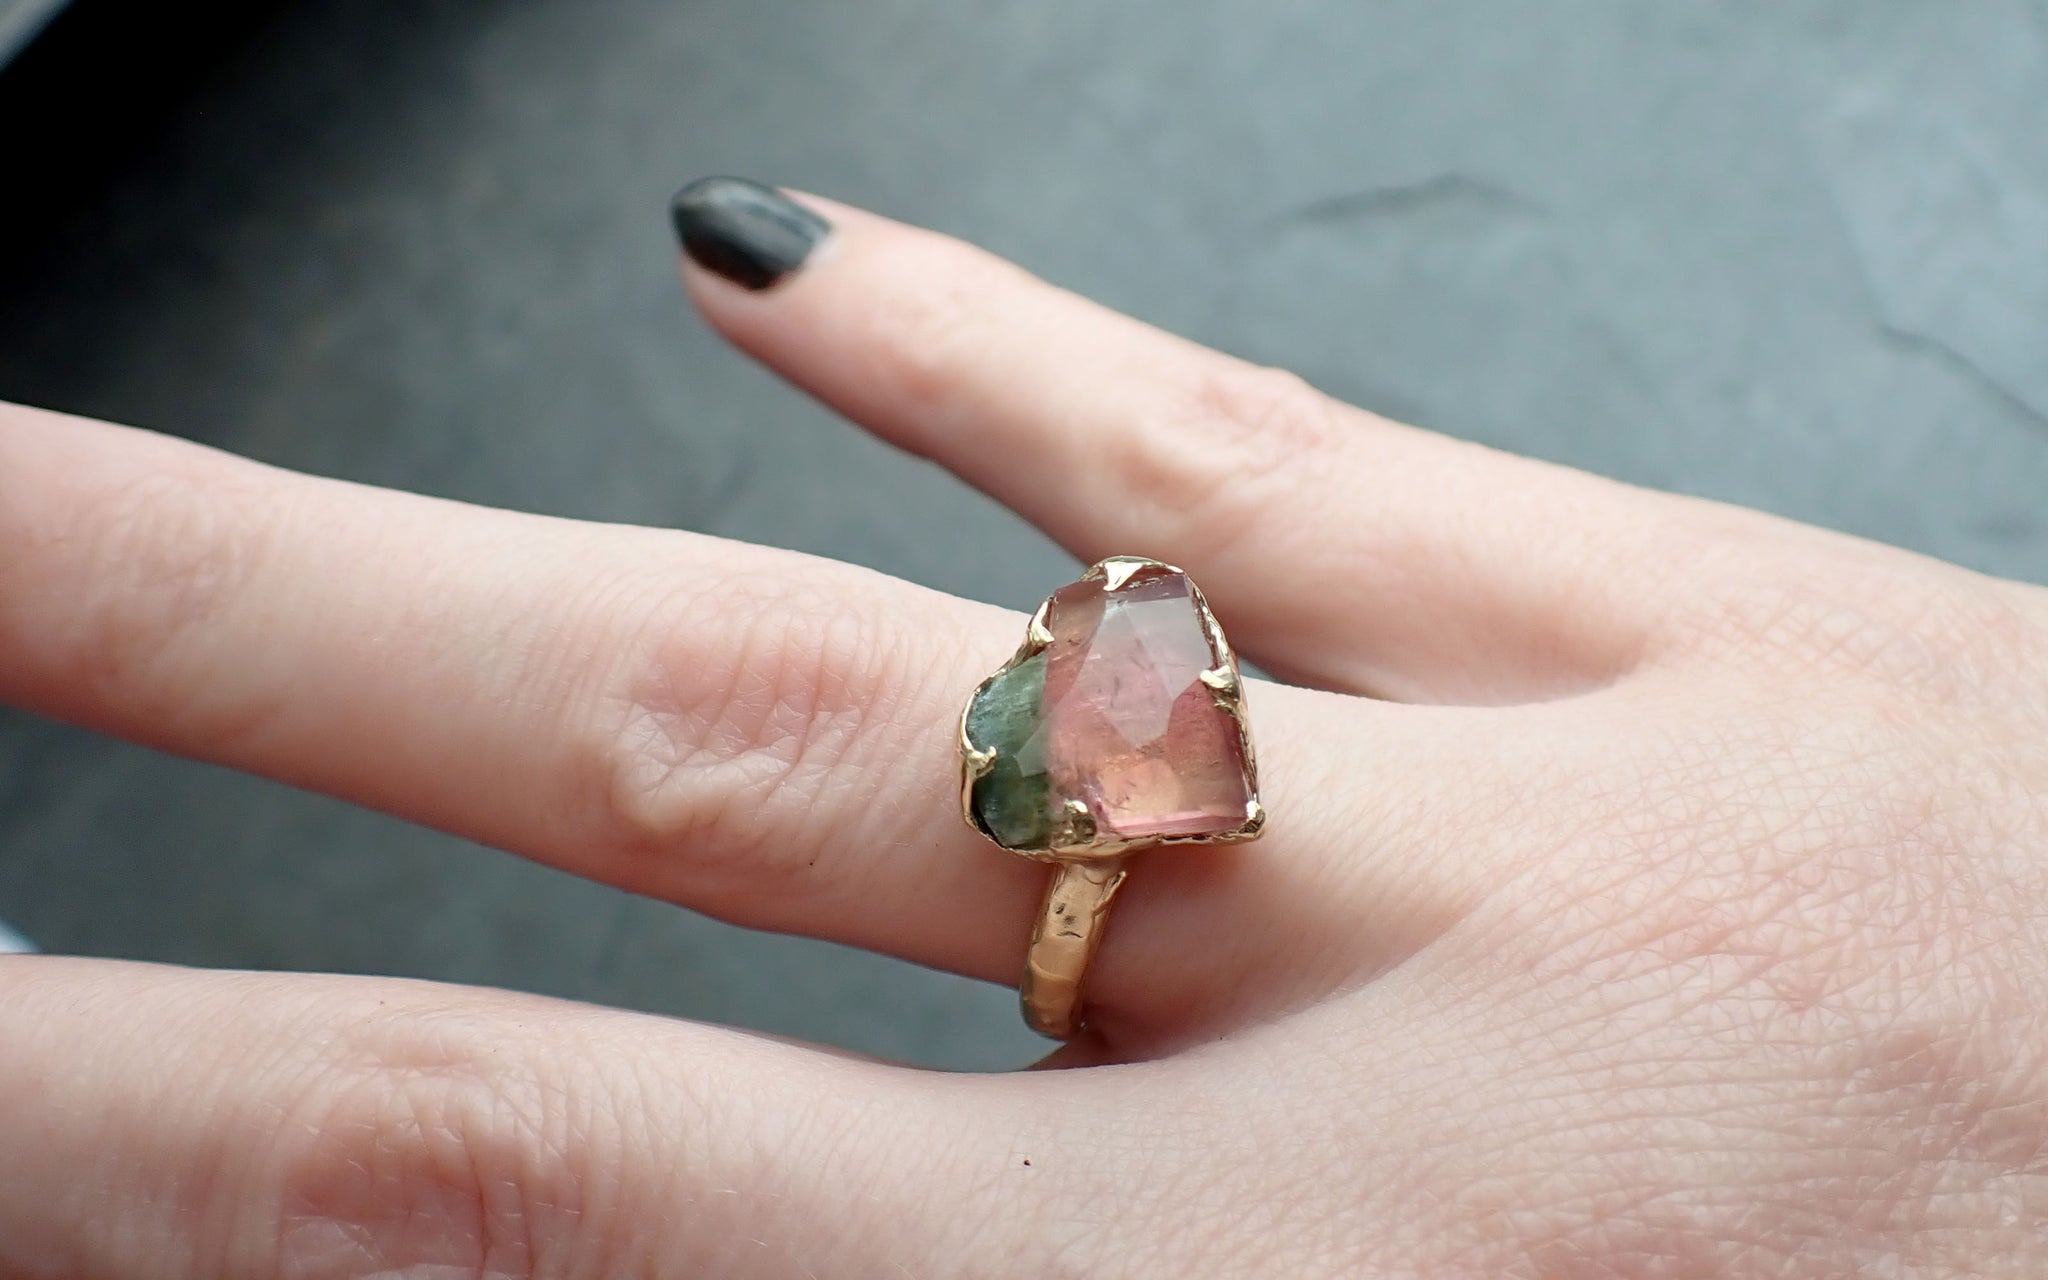 Fancy cut Watermelon Tourmaline Yellow Gold Ring Gemstone Solitaire recycled 18k statement cocktail statement 2395